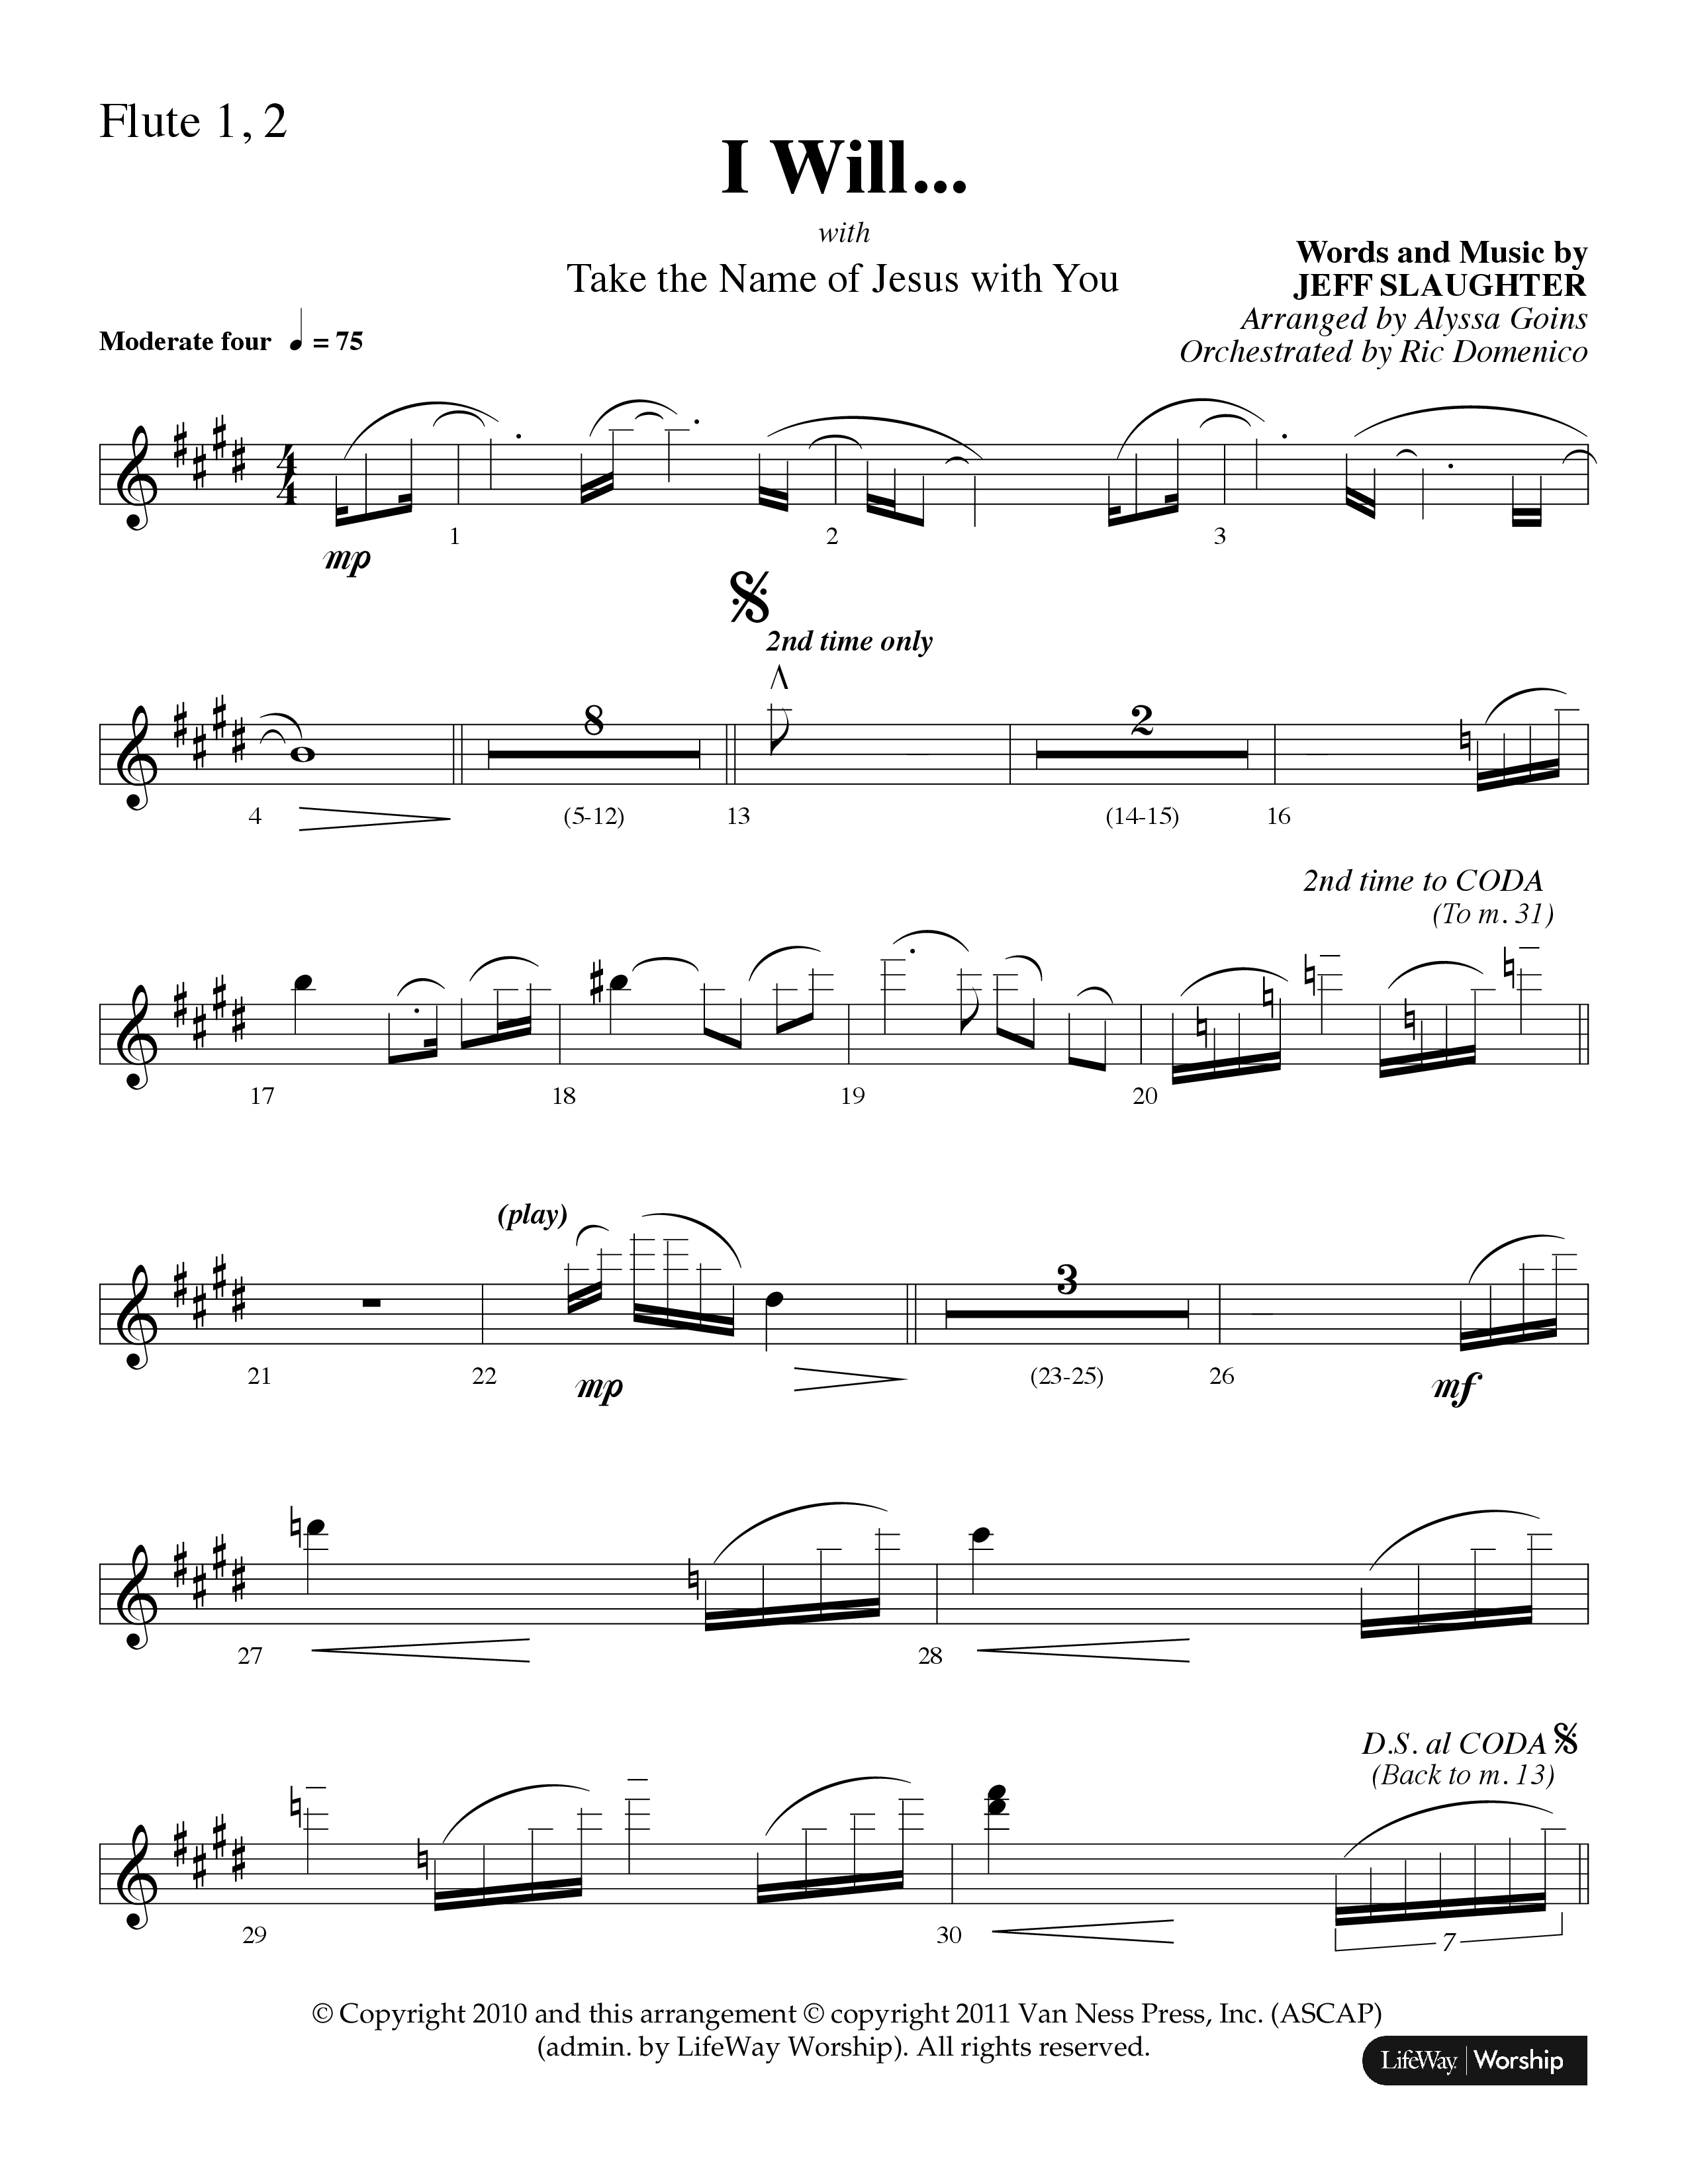 I Will (with Take The Name Of Jesus With You) (Choral Anthem SATB) Flute 1/2 (Lifeway Choral / Arr. Alyssa Goins / Orch. Ric Domenico)